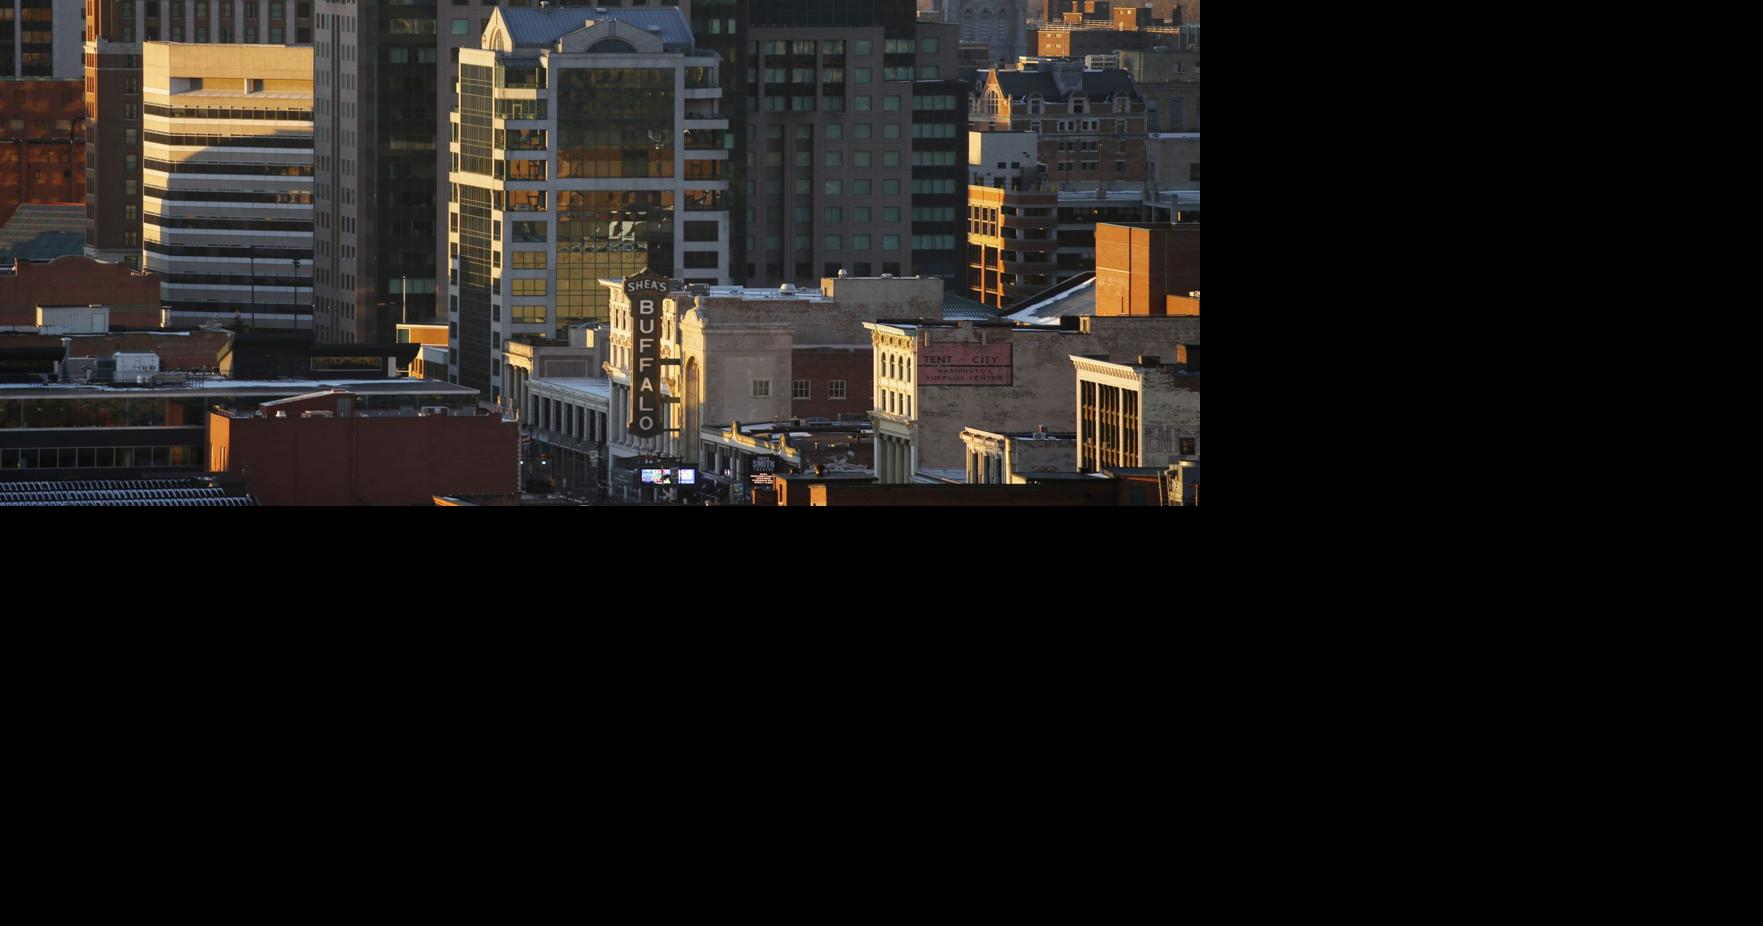 Buffalo's population growth outperformed other upstate cities and